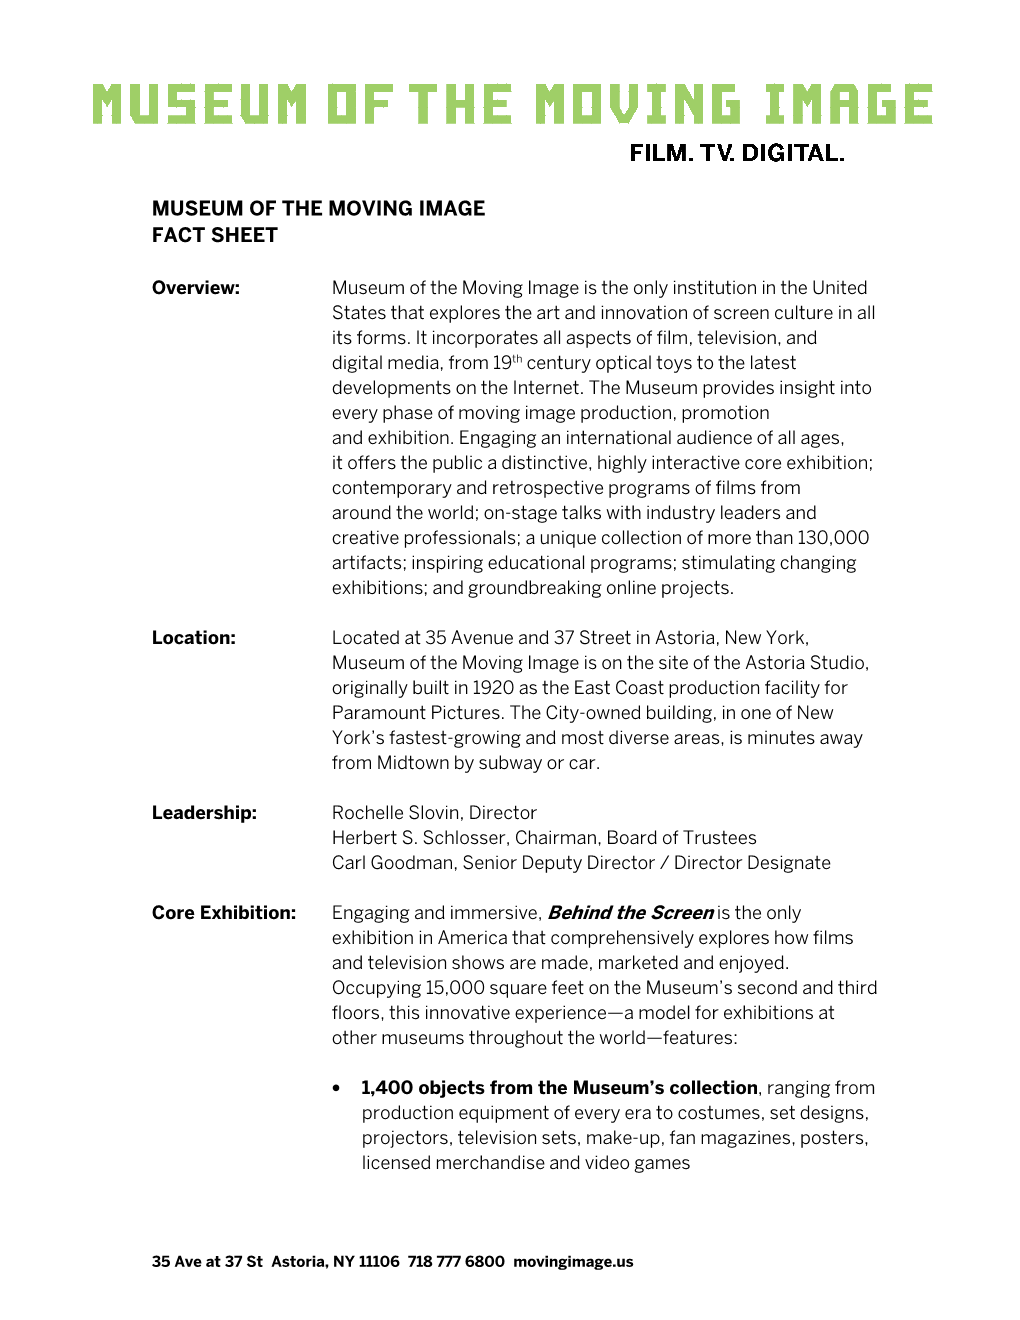 Museum of the Moving Image Fact Sheet